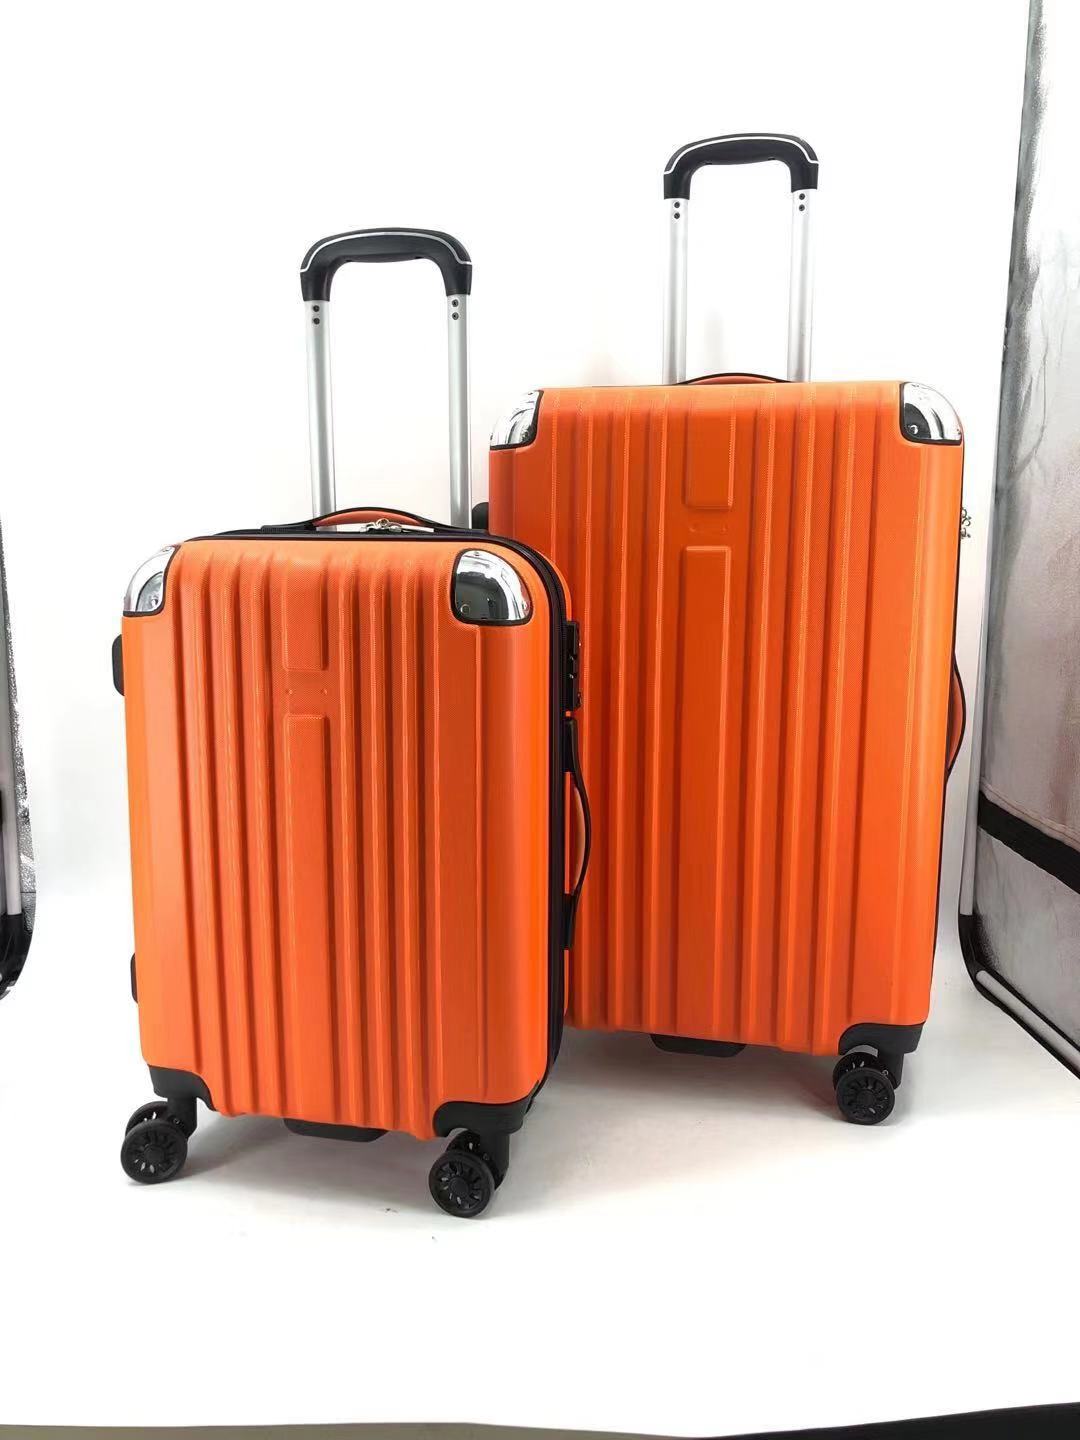 ABS  Spinner Luggage/Trolley Case Suitcase/Travel